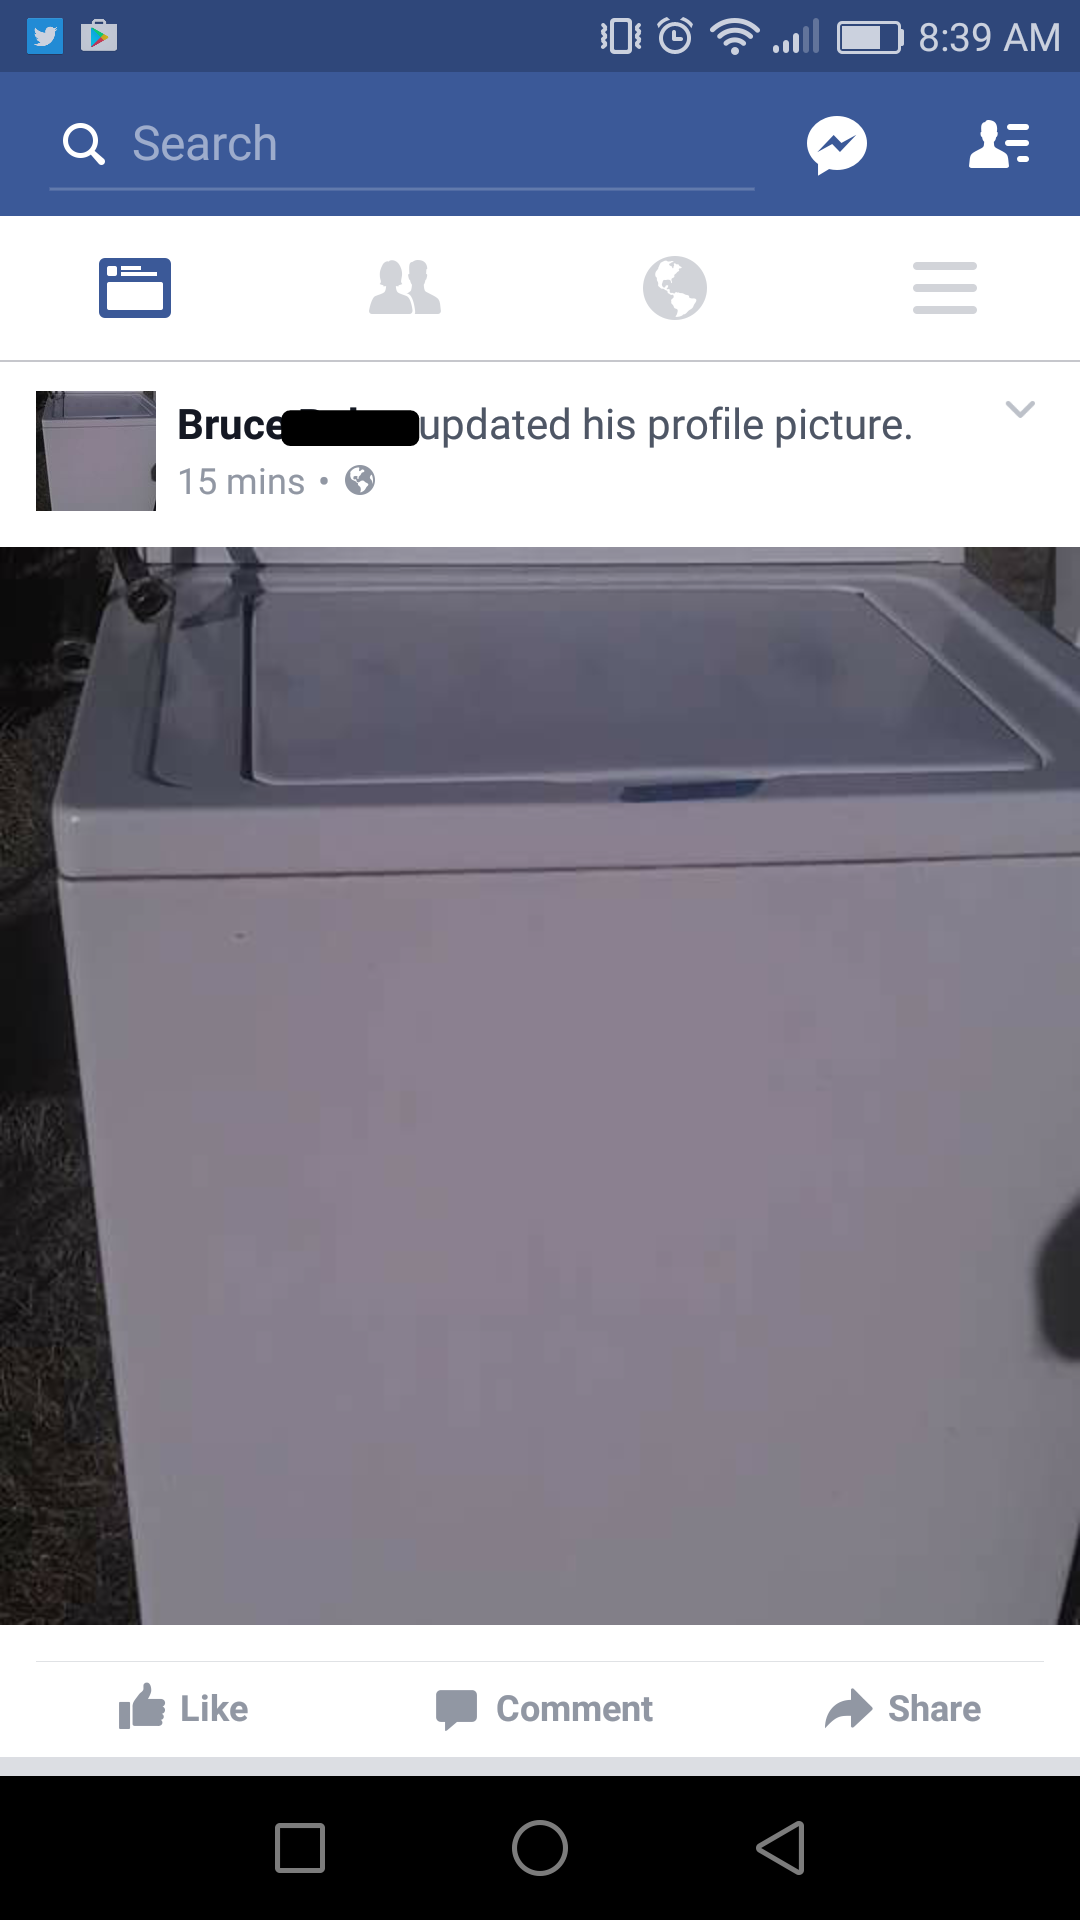 Bruce updated his profile picture to a washing machine